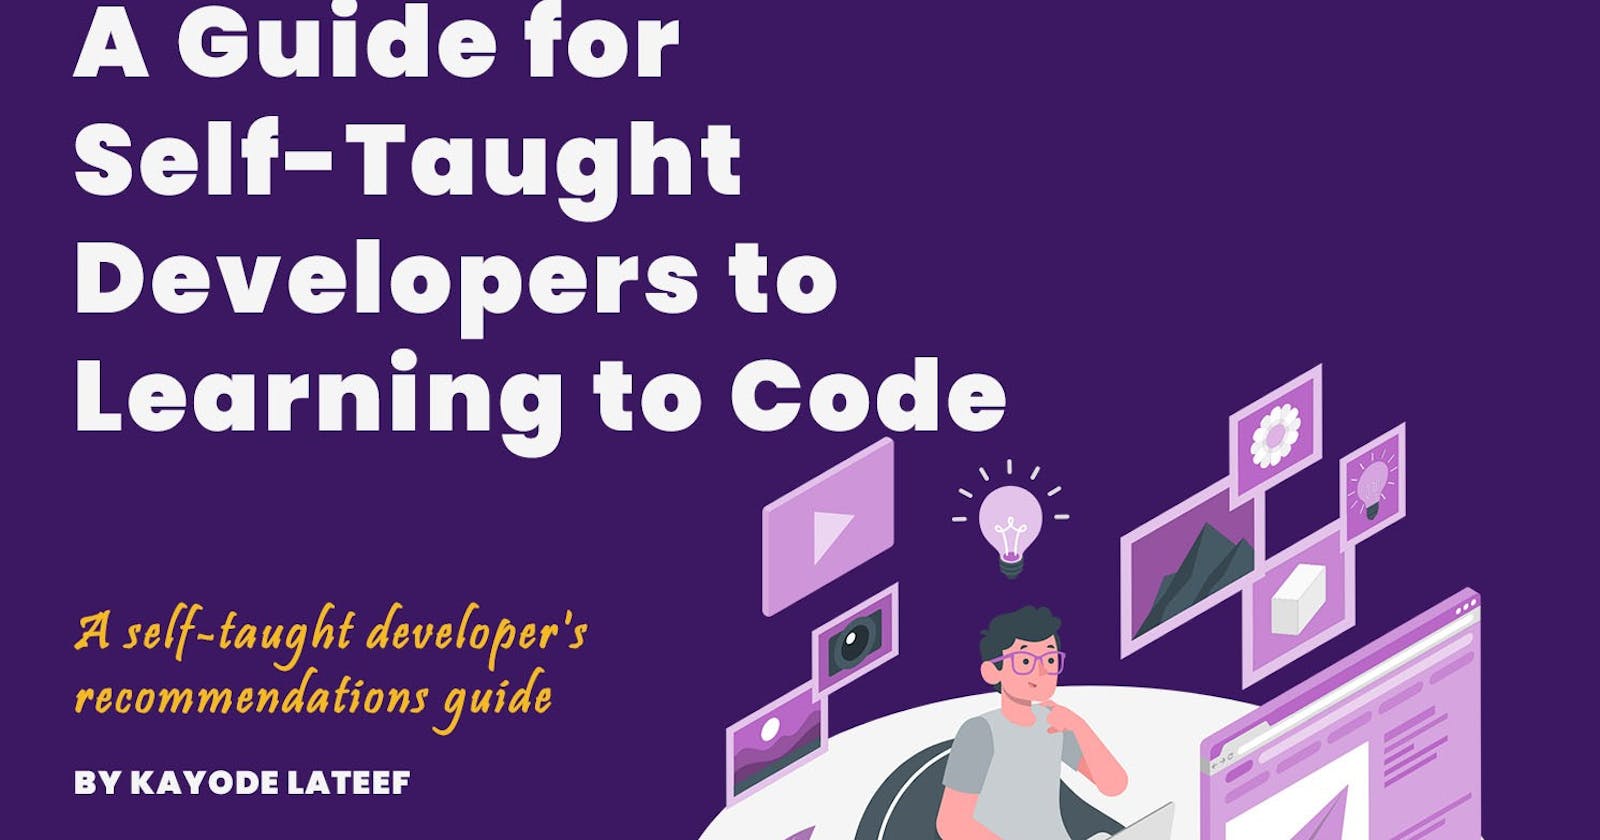 A Guide for Self-Taught Developers to Learning to Code